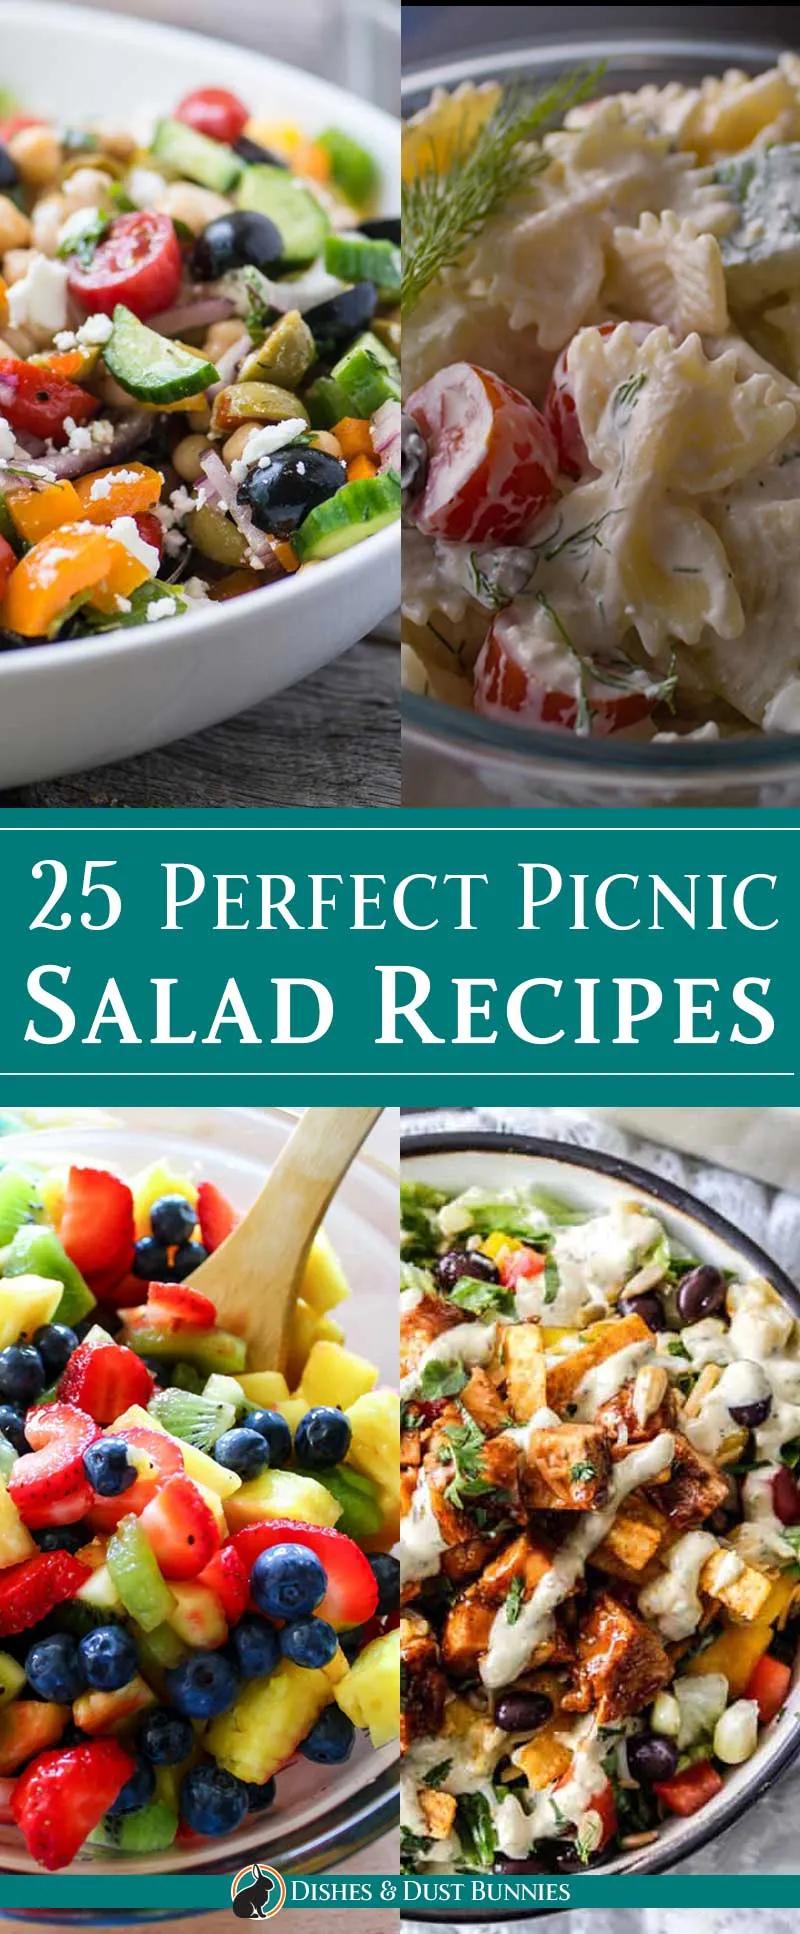 25 Perfect Picnic Salad Recipes - Dishes &amp; Dust Bunnies